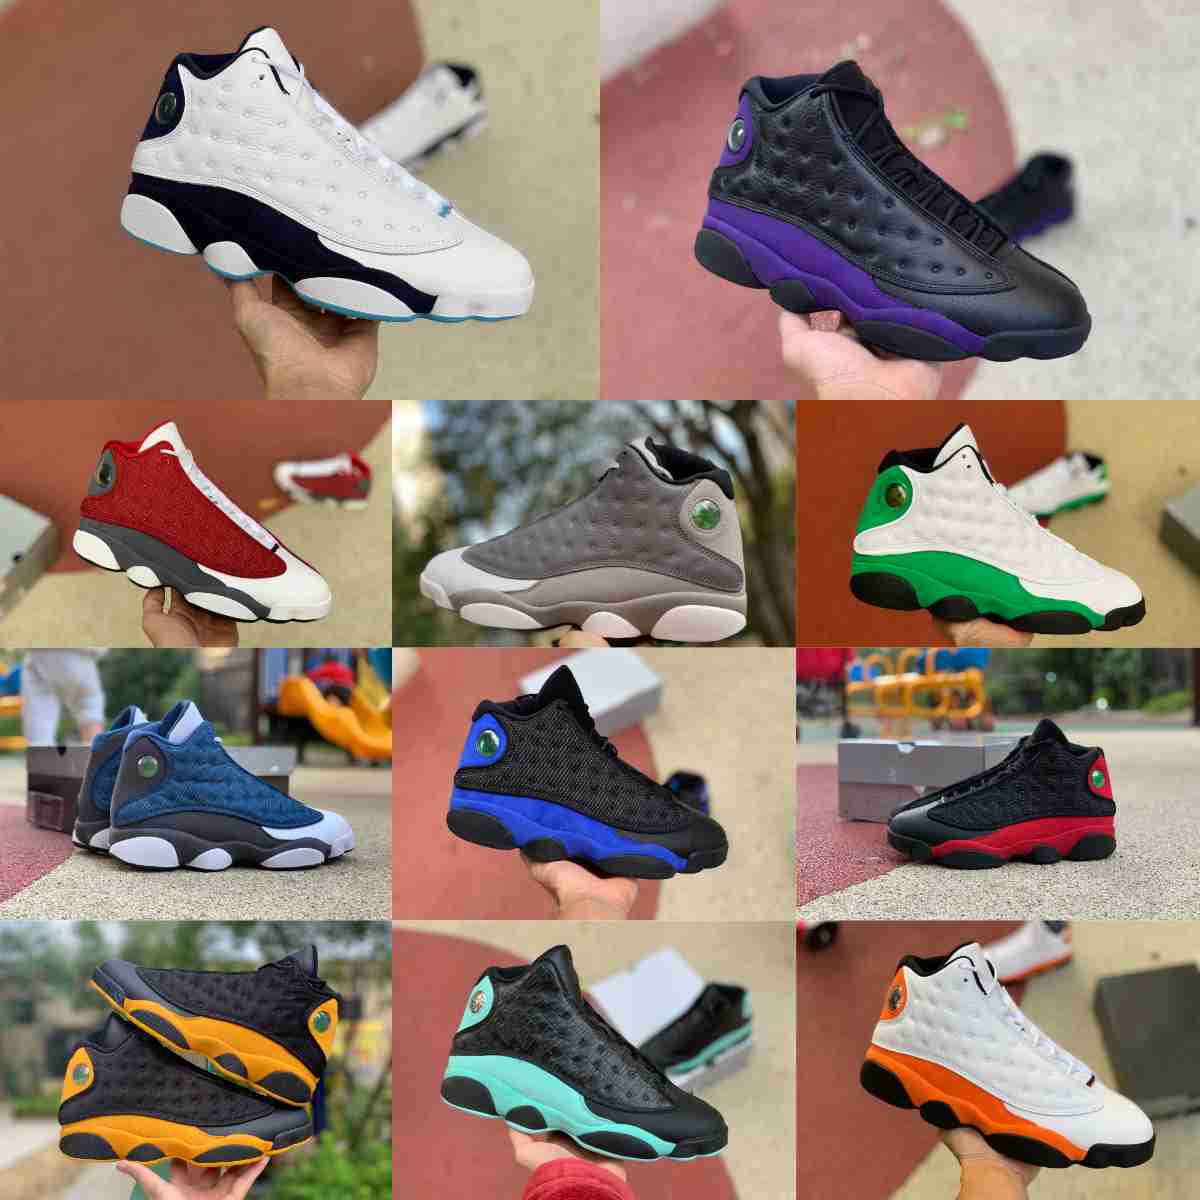 

Jumpman 13 13S Basketball Shoes Mens High Flint Black Cat Grey Toe Court Purple Chicago Bred Island Green Red Dirty Hyper Royal Starfish He Got Game Trainer Sneakers S8, J0021